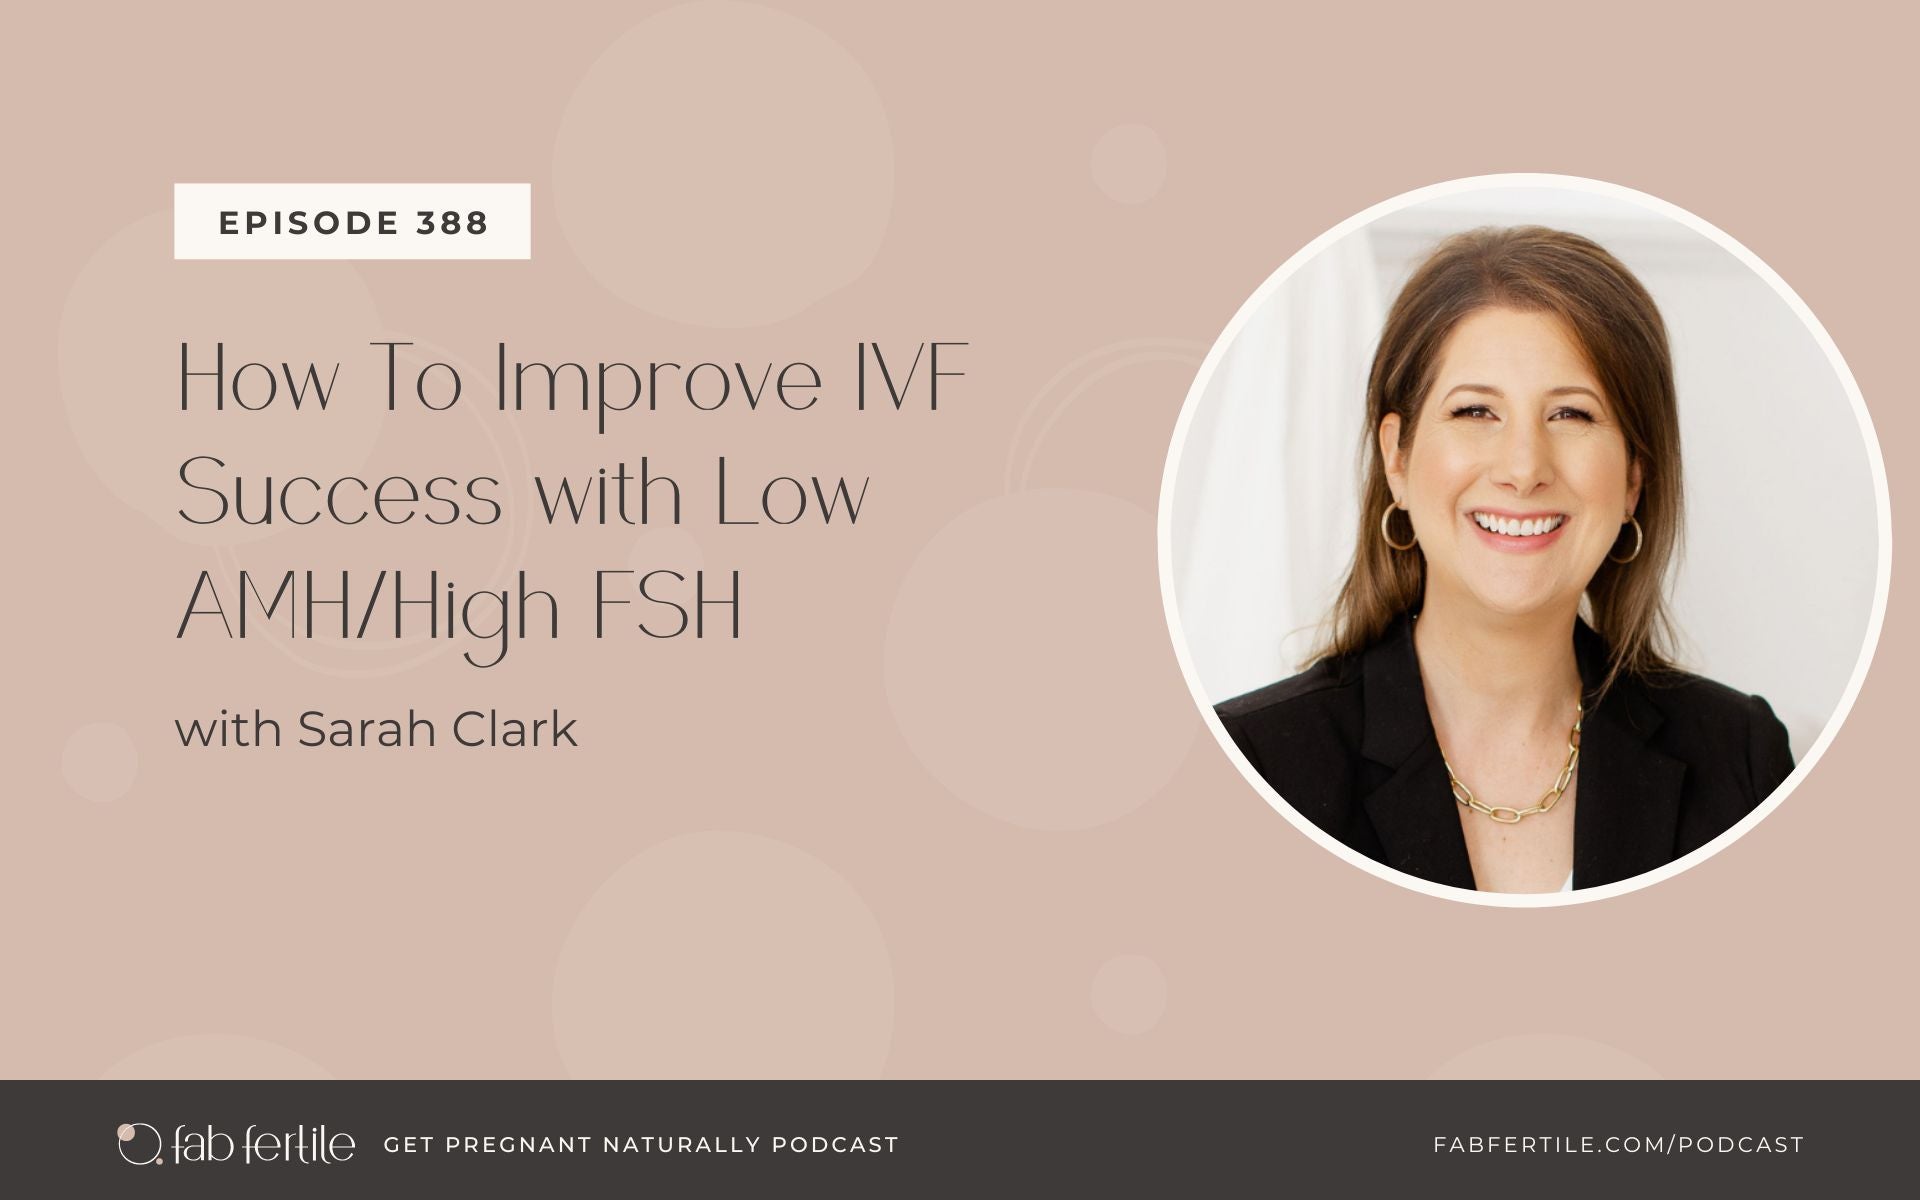 How To Improve IVF Success with Low AMH/High FSH